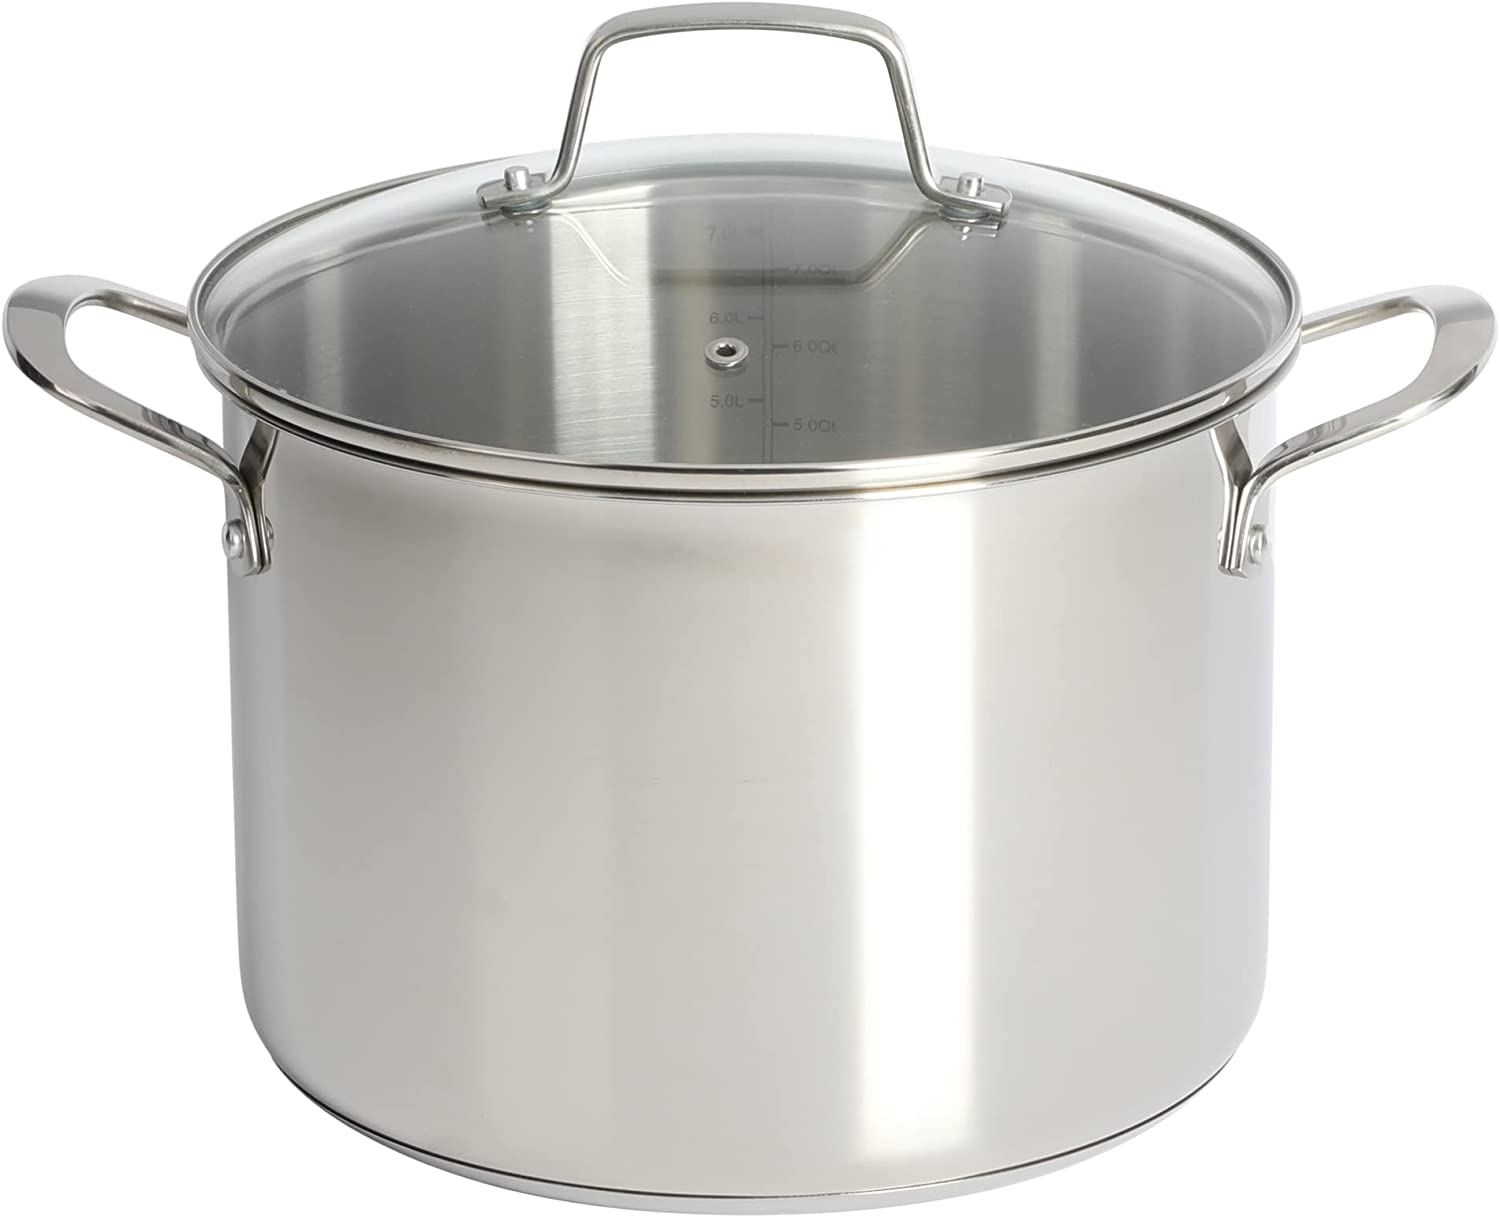 Martha Stewart Castelle 8 qt Stainless Steel Stock Pot with Lid